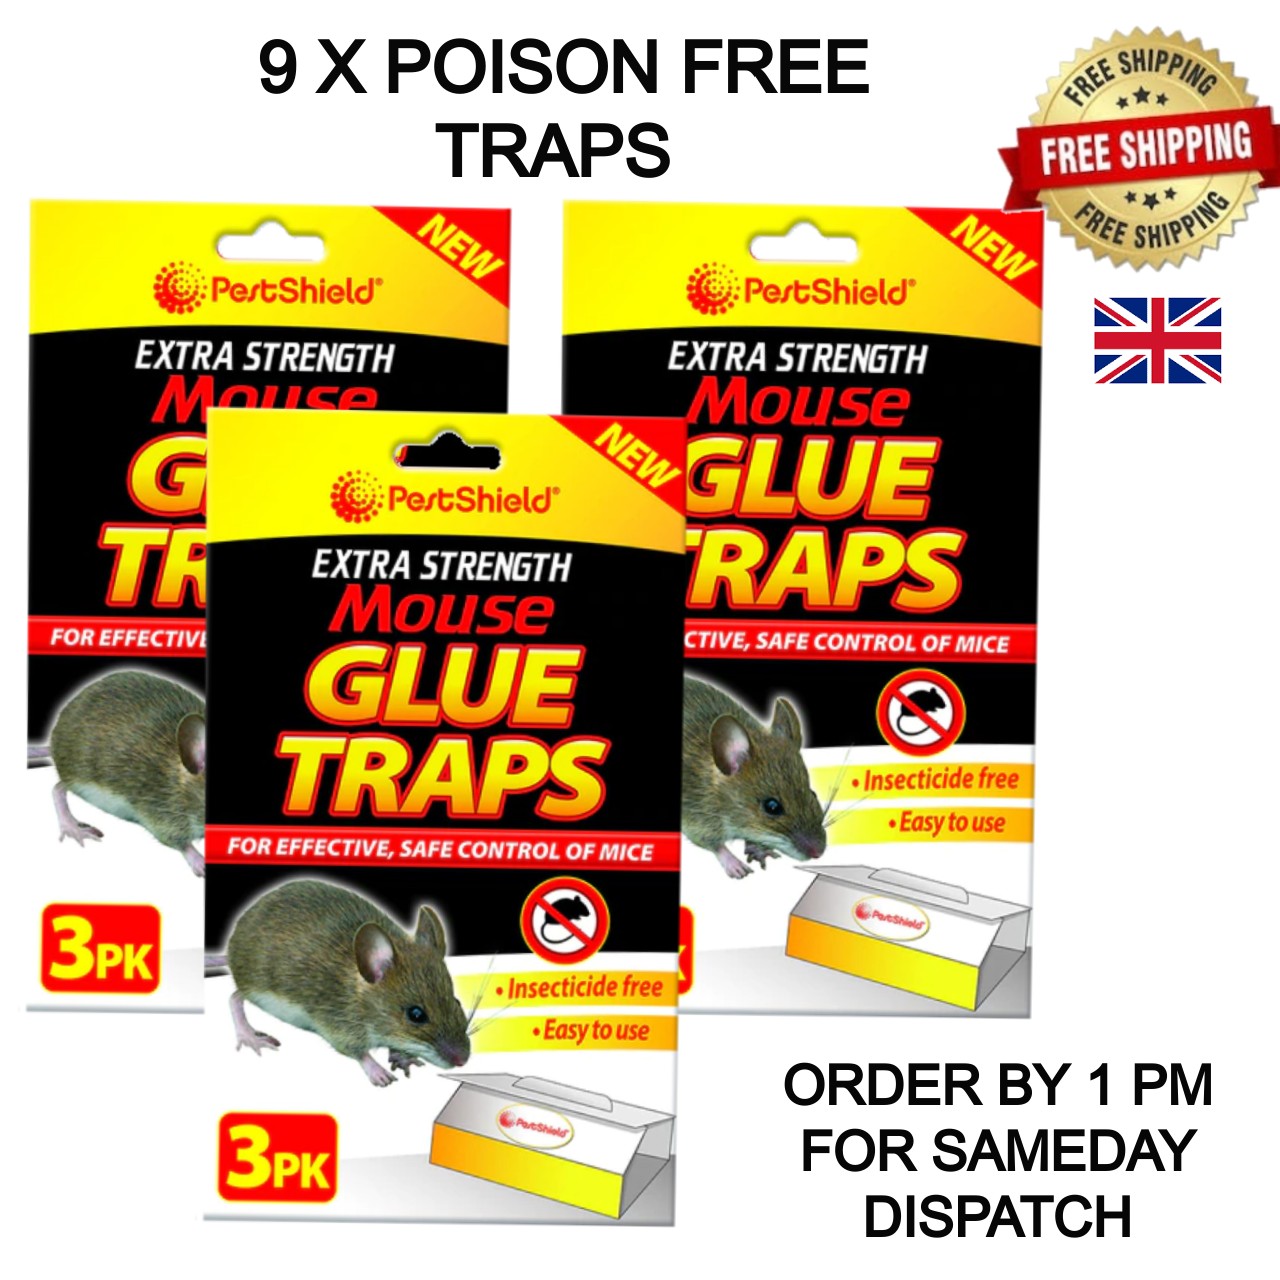 PESTSHIELD EXTRA STRENGTH MOUSE / RAT GLUE TRAPS - 3 PIECES PER PACK